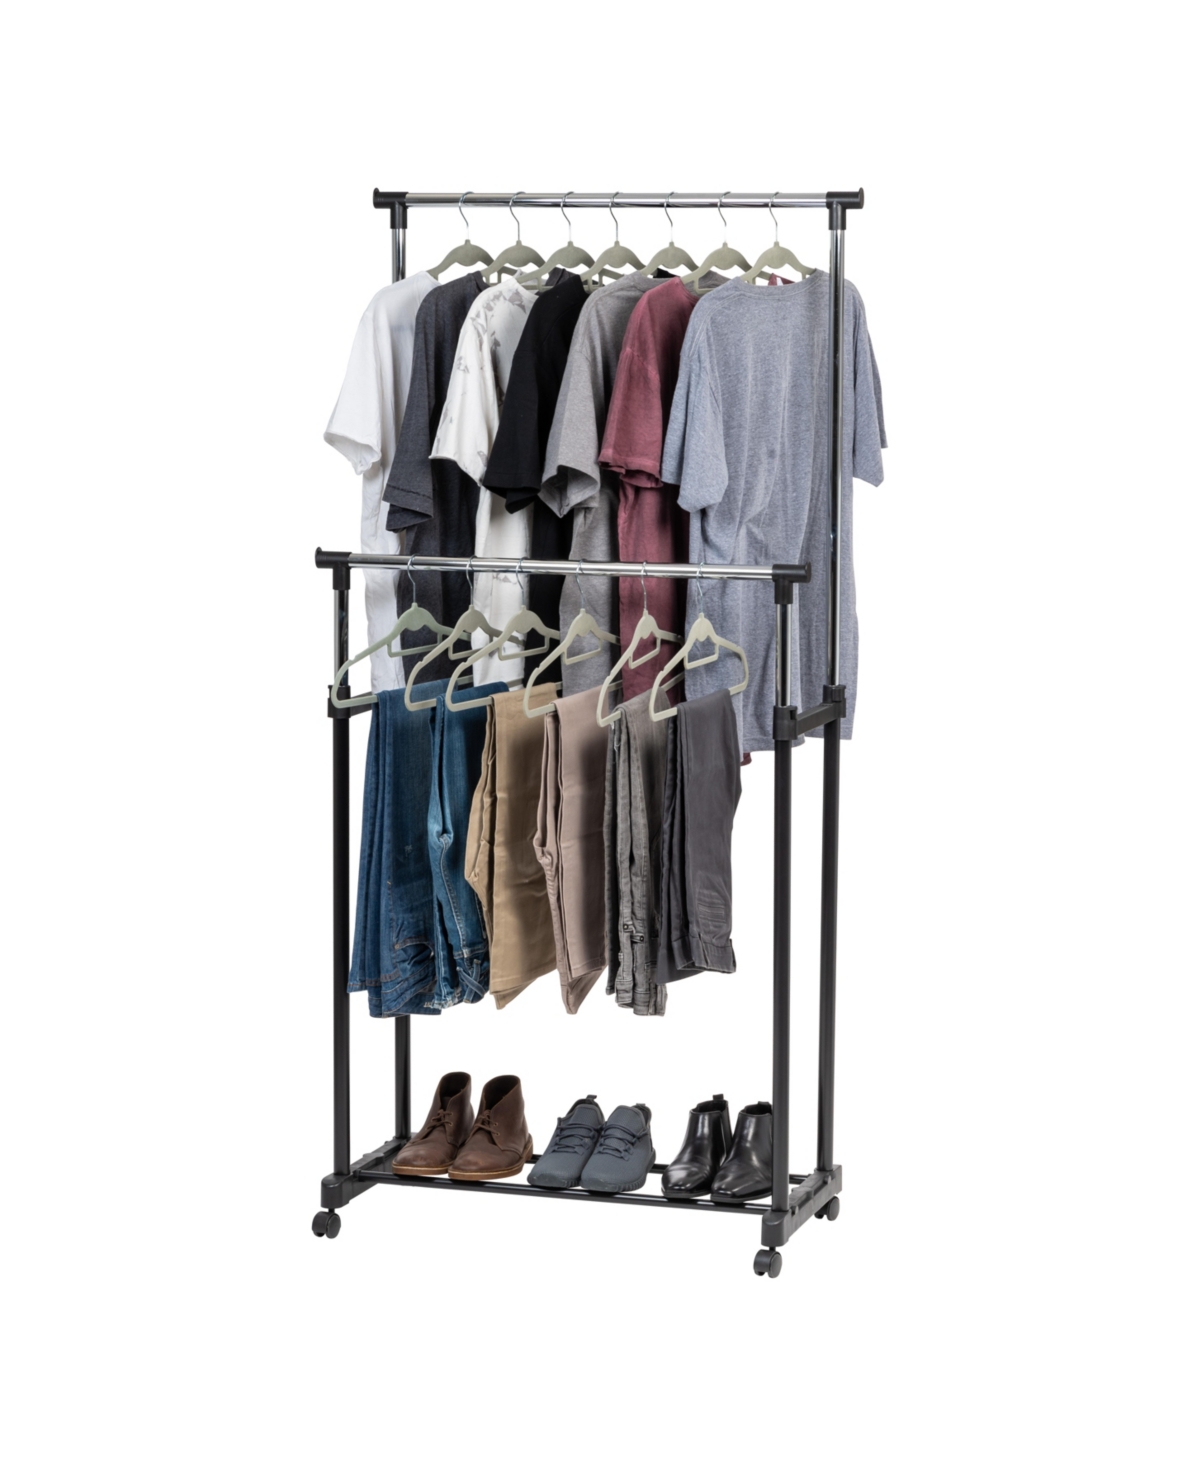 Adjustable Double Rod Clothes Rack, Garment Rack, Clothing Rack with Wheels - Black